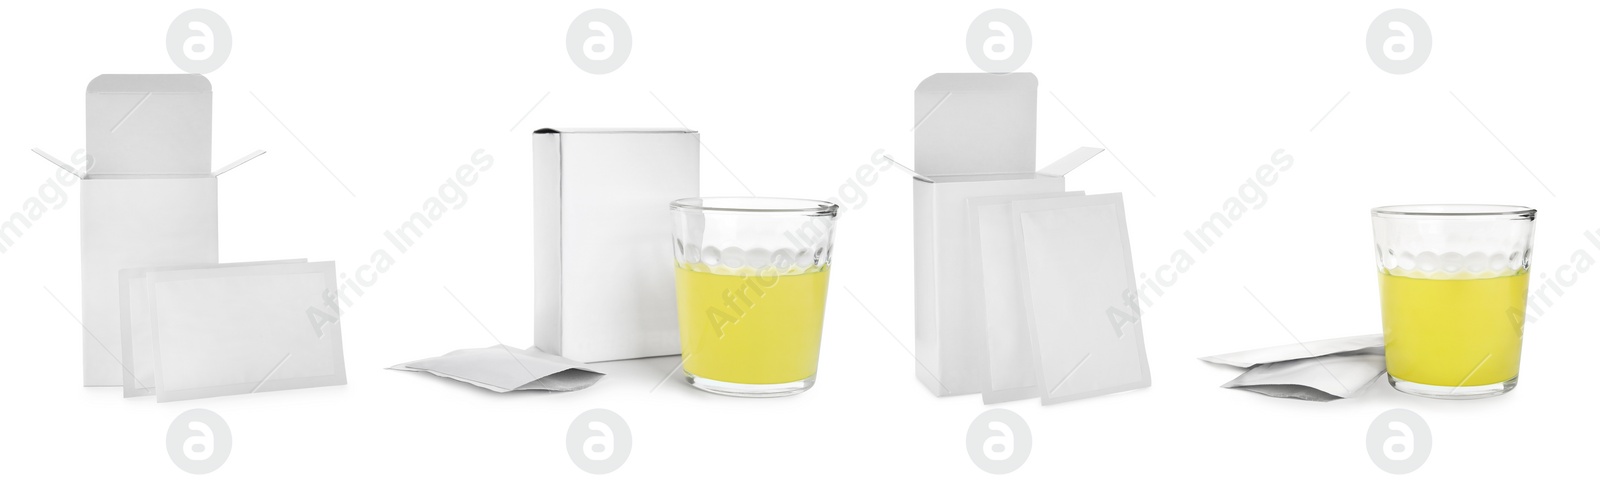 Image of Set with sachets of medicine on white background. Banner design